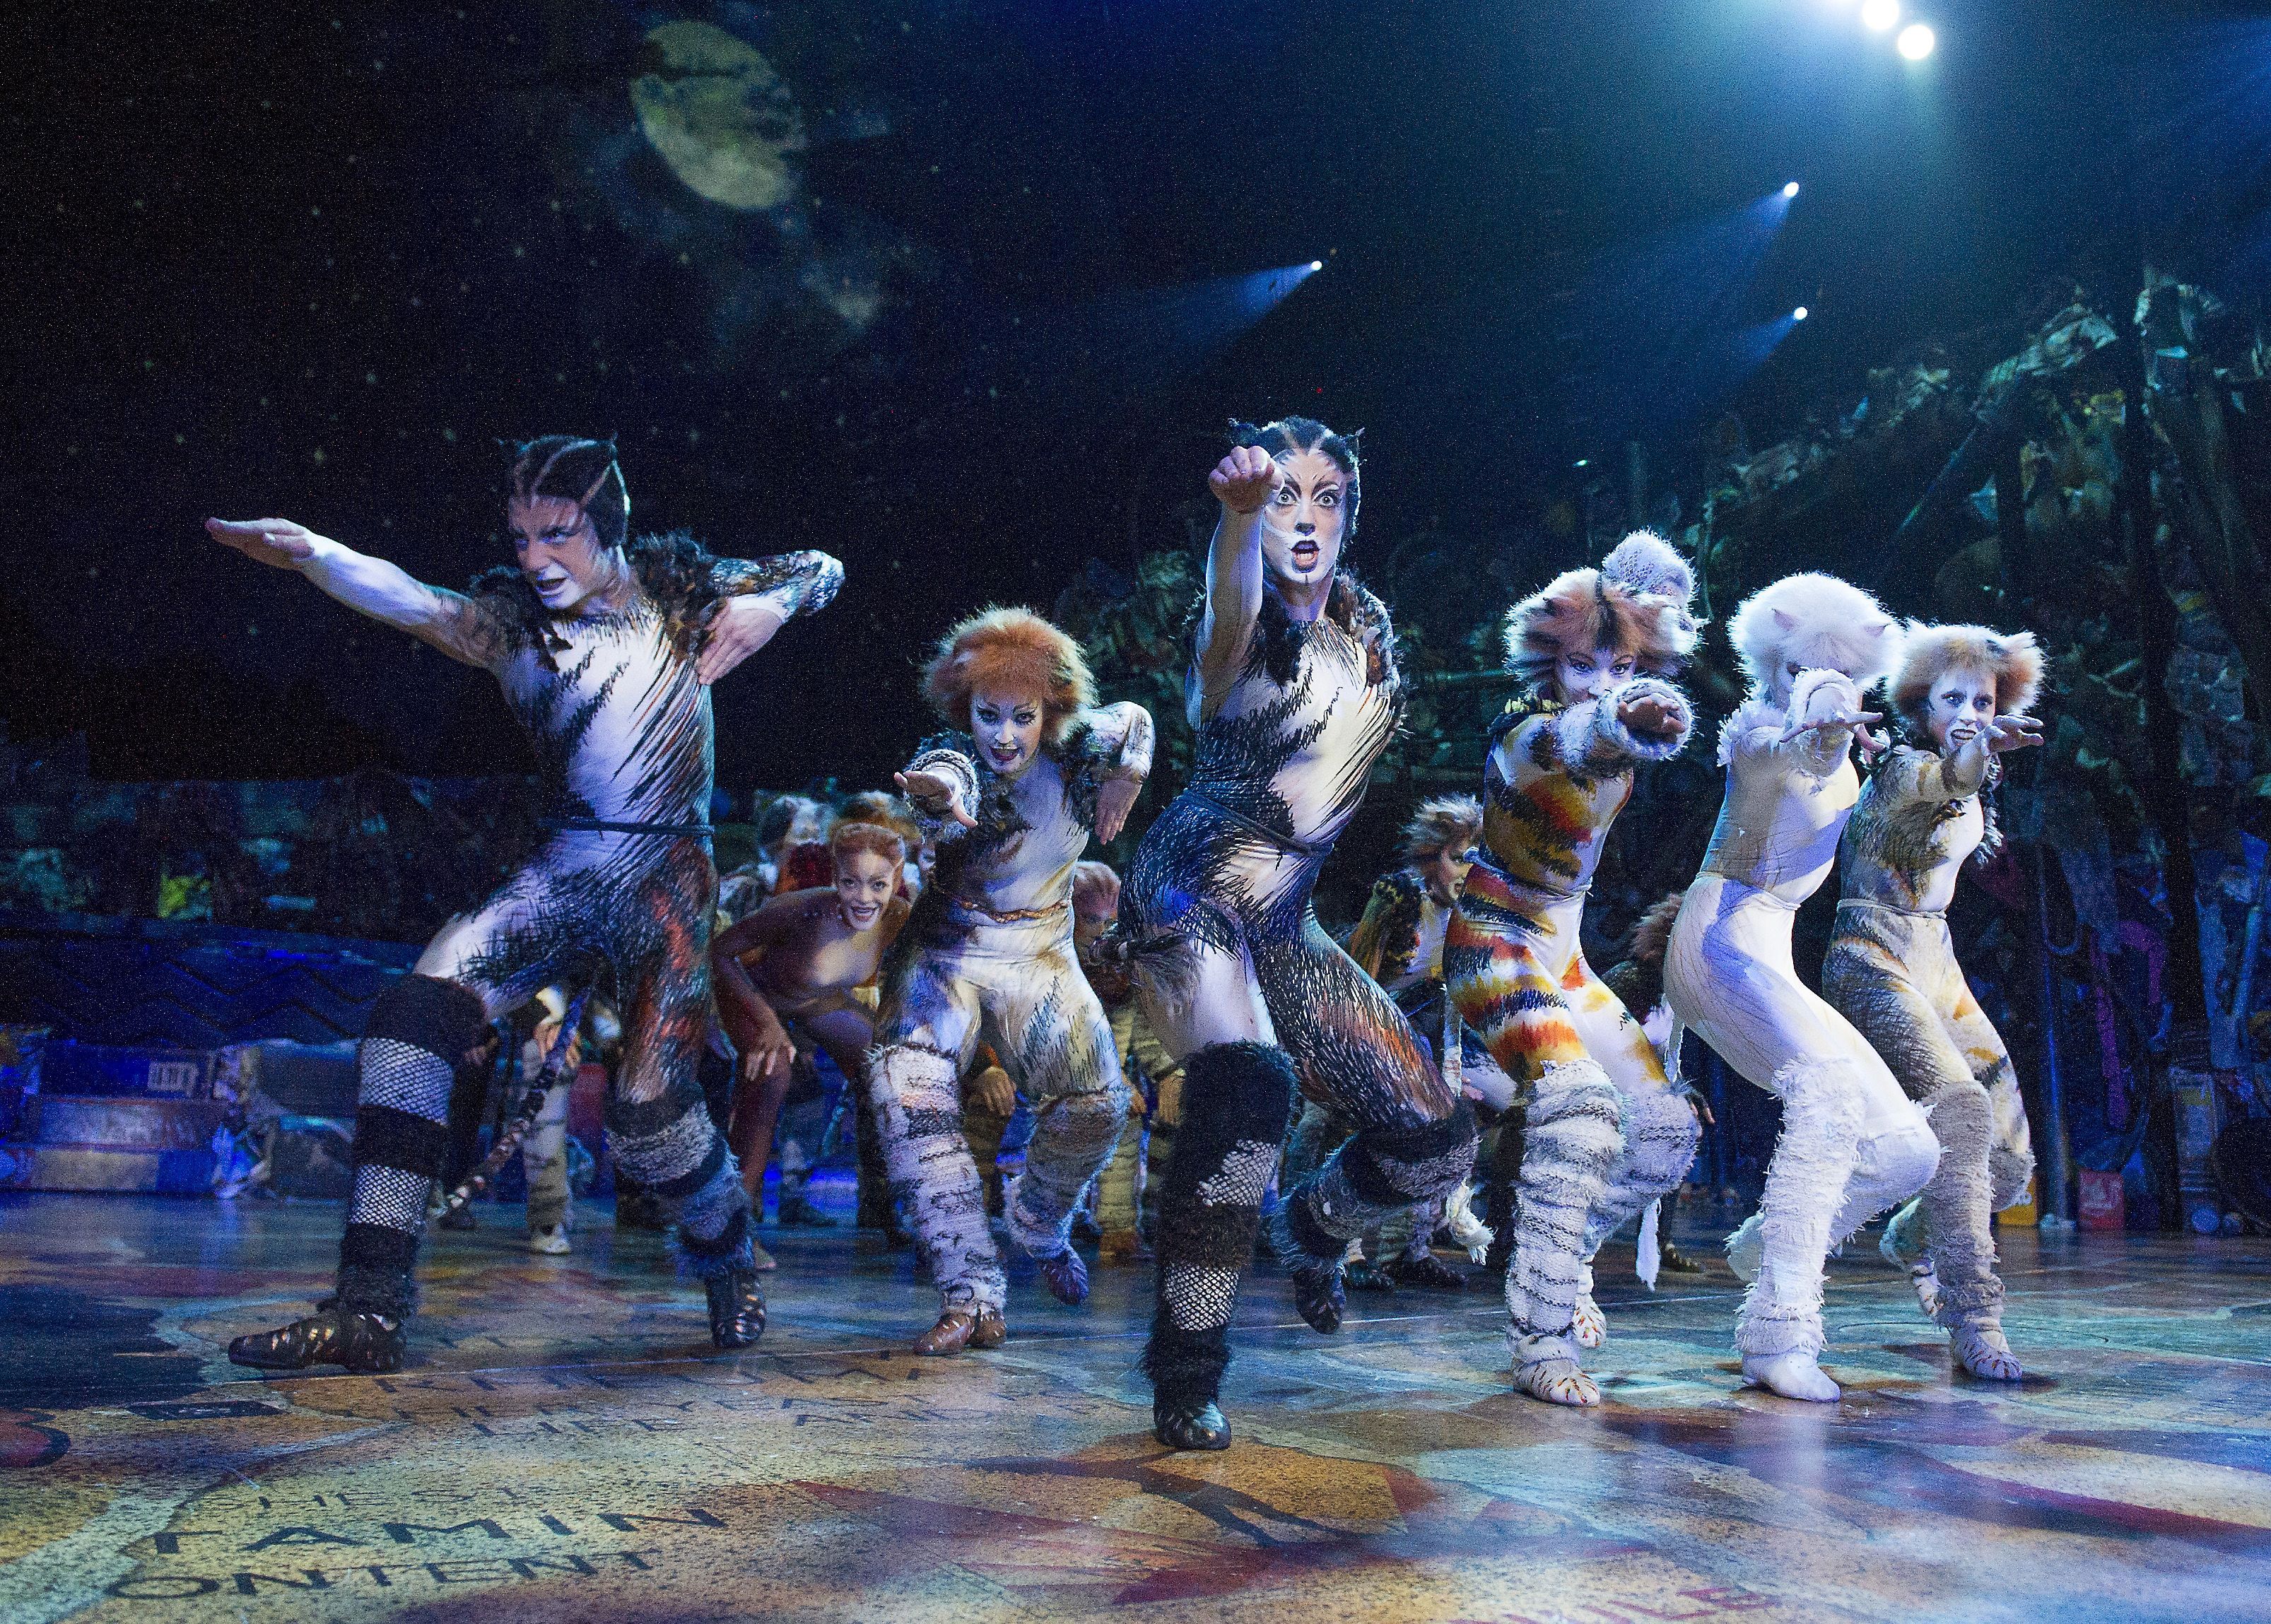 Cats the Musical 2016 